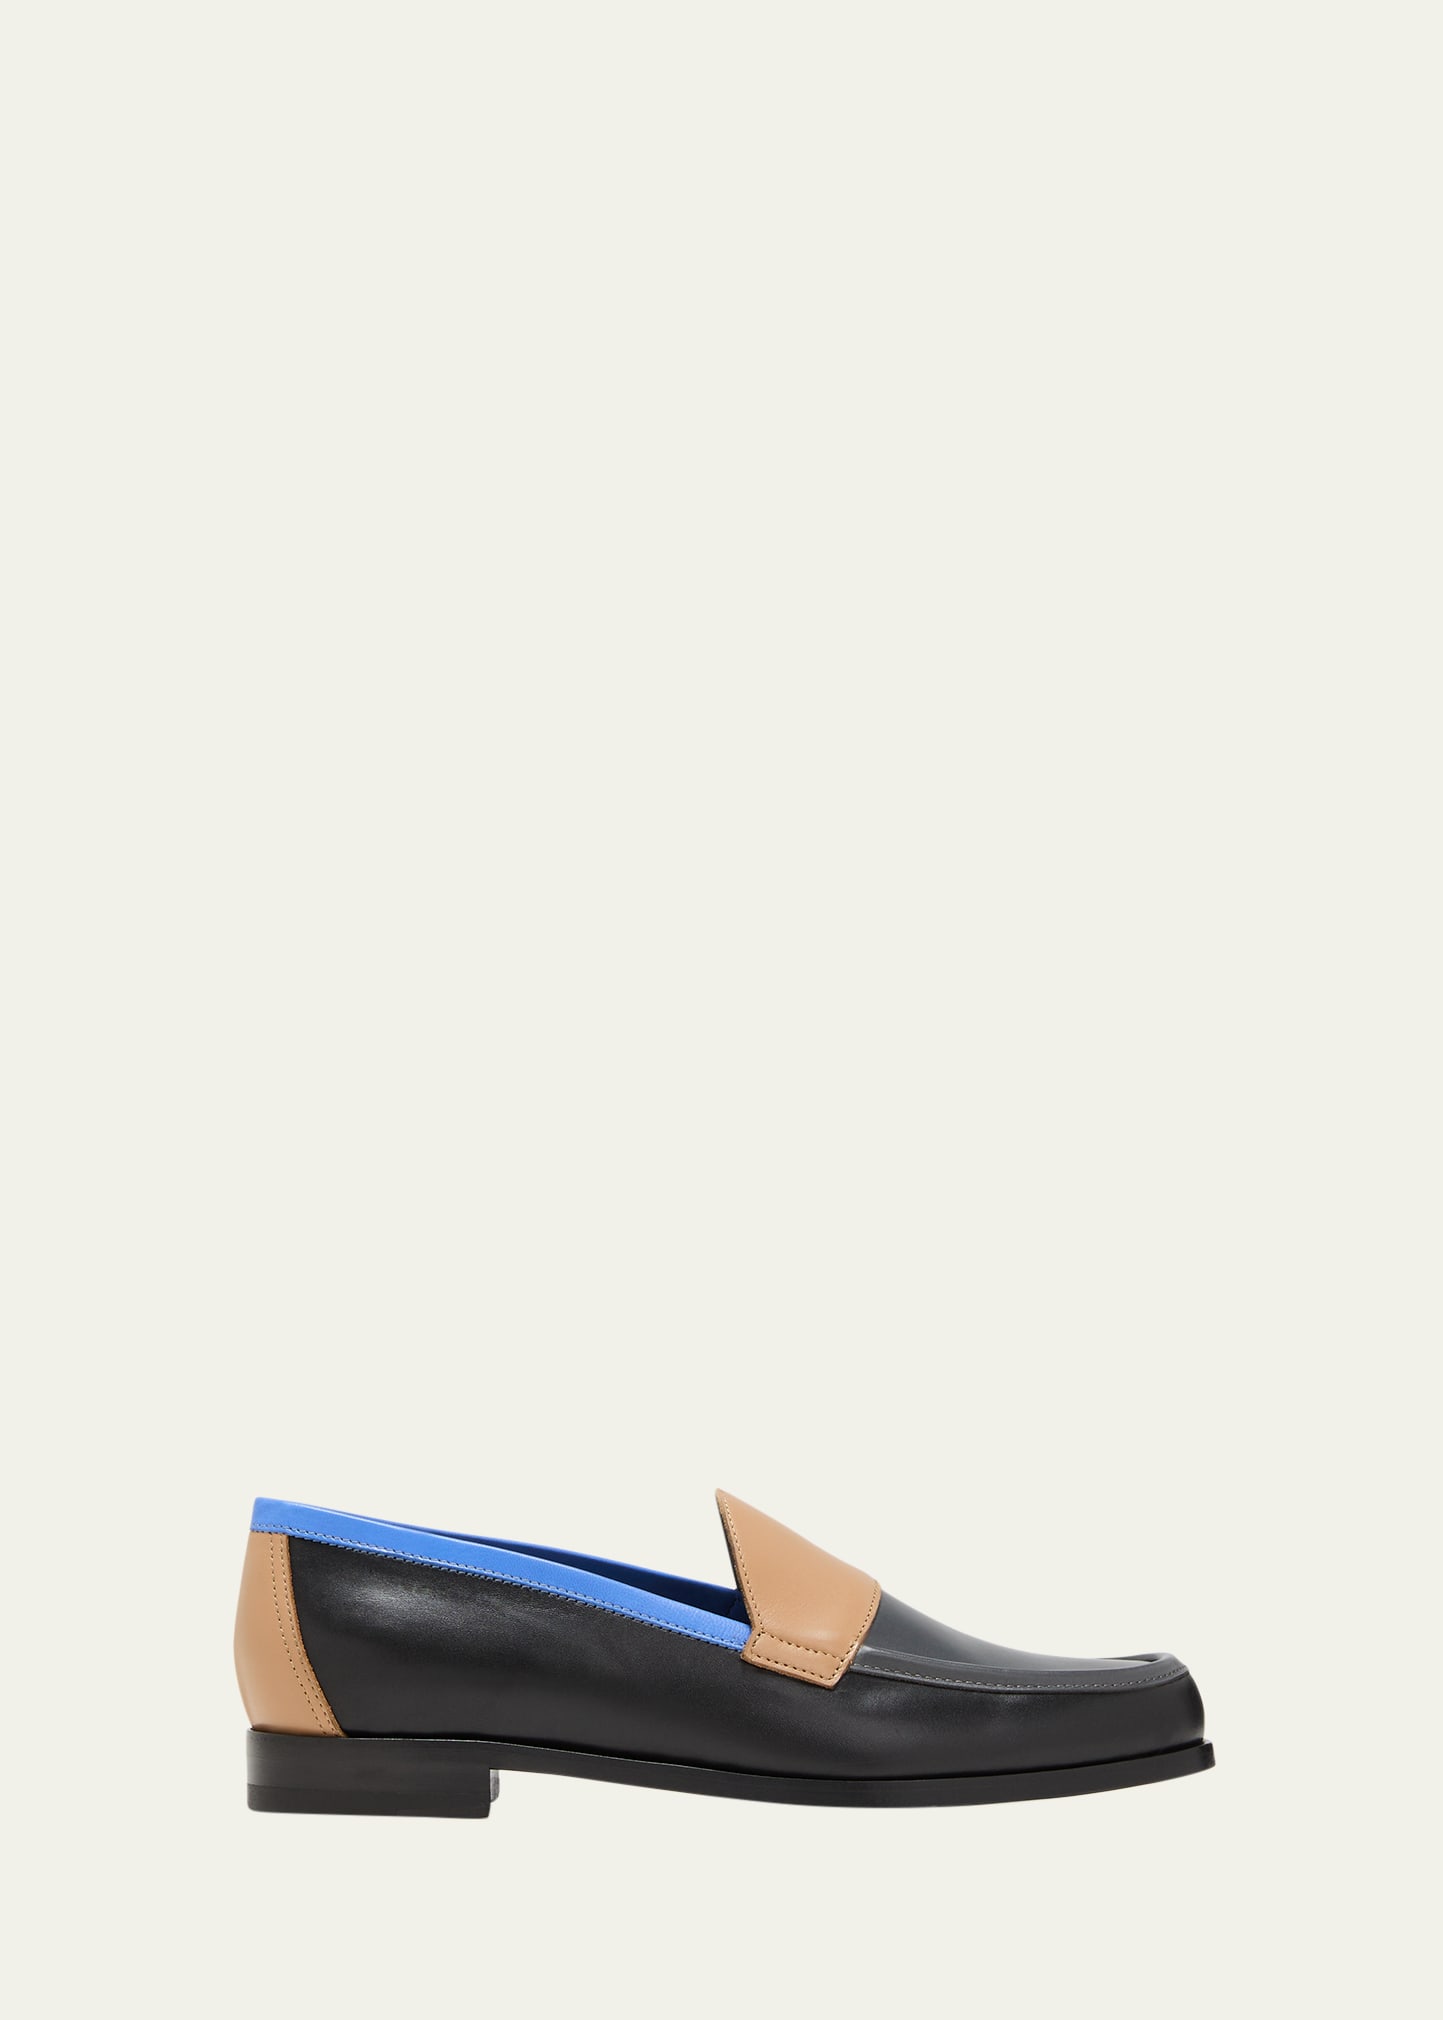 PIERRE HARDY HARDY COLORBLOCK LEATHER LOAFERS